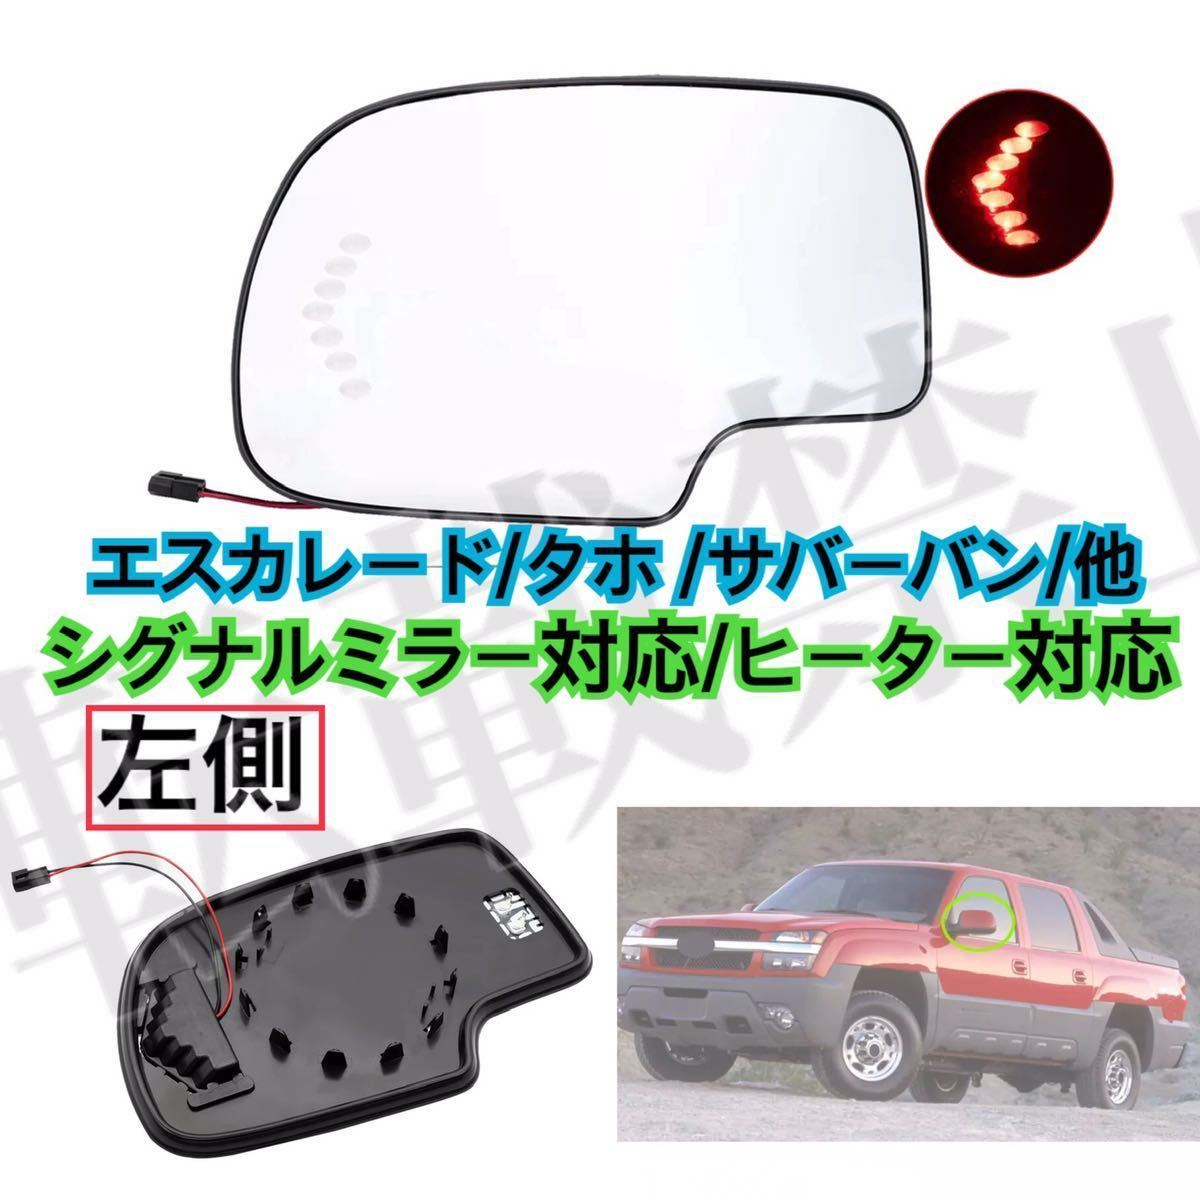 [ returned goods guarantee / new goods / left side ] Escalade / Tahoe / Suburban / other [ nail attaching / signal mirror correspondence / heater correspondence ] door mirror glass lens [00-06 year ]